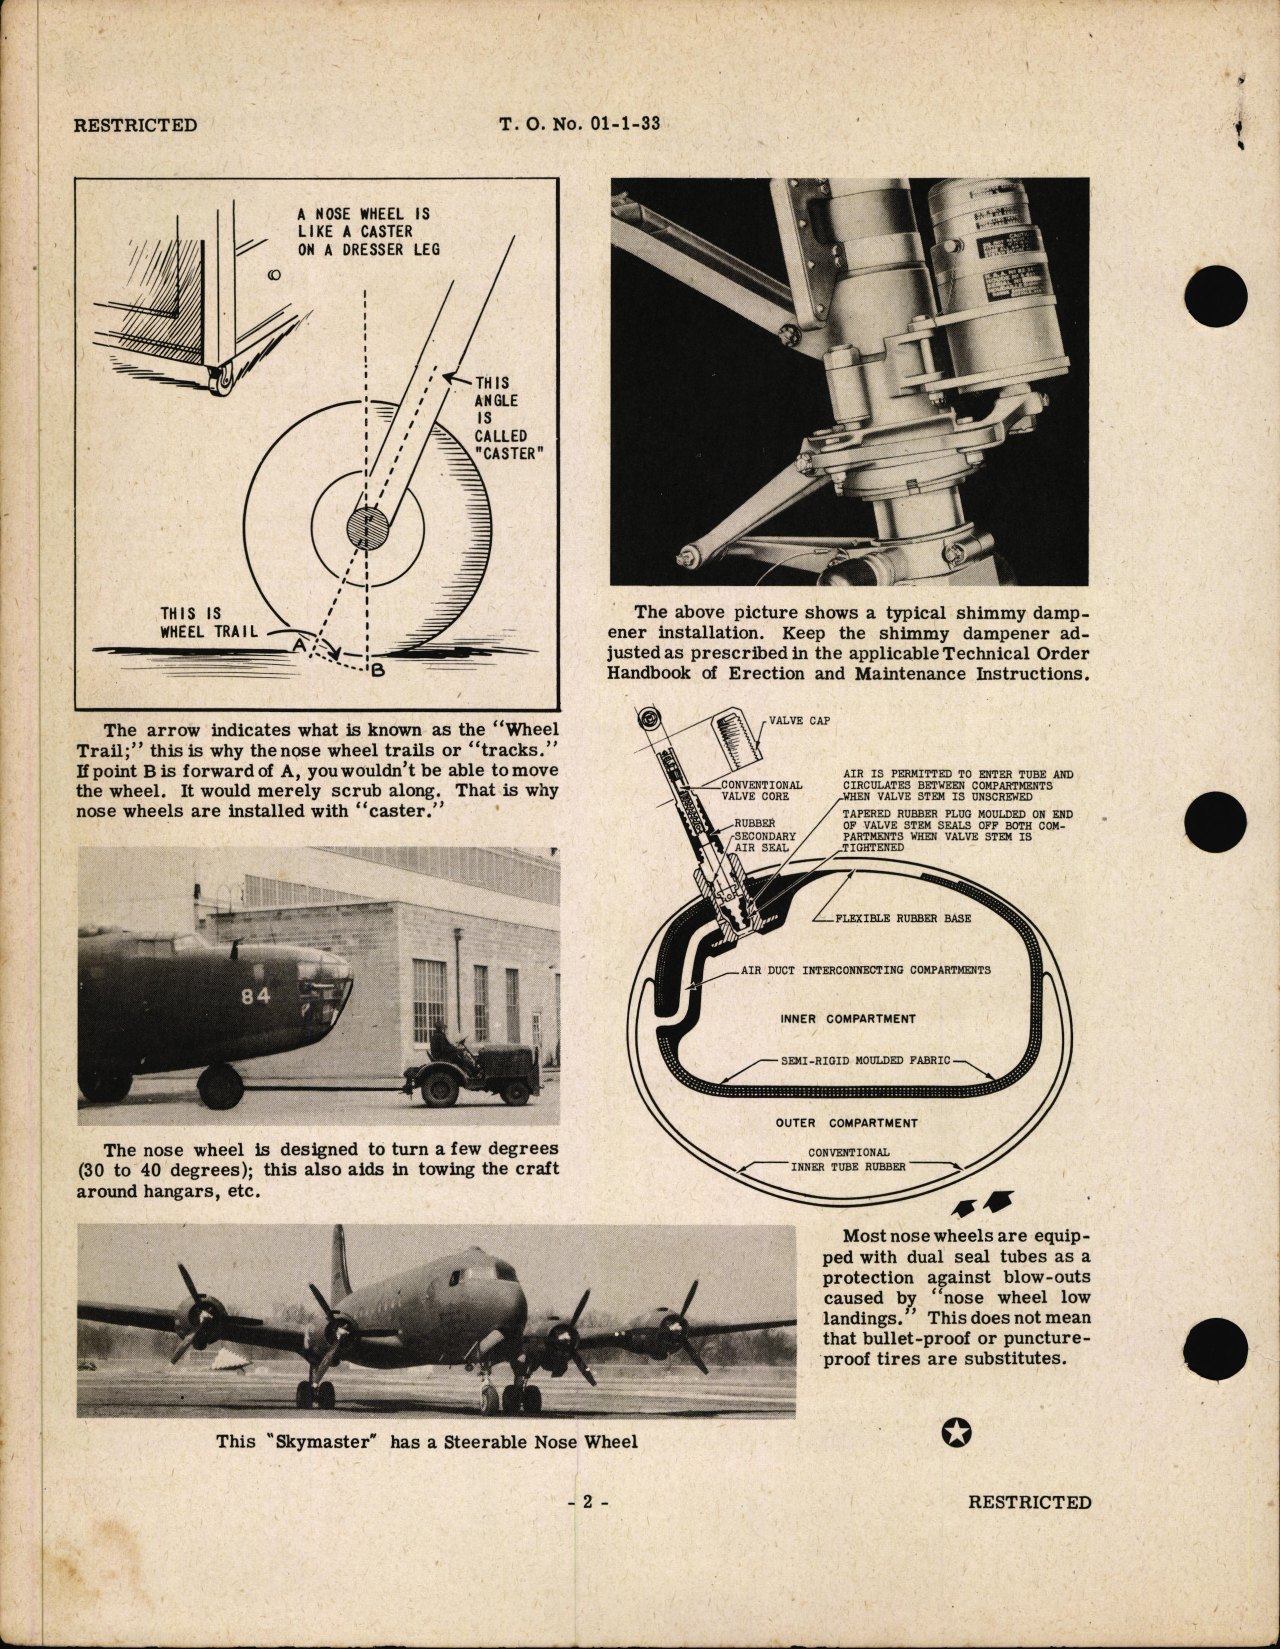 Sample page 2 from AirCorps Library document: Operation & Technique of Nose Wheel Airplanes, 01-1-33